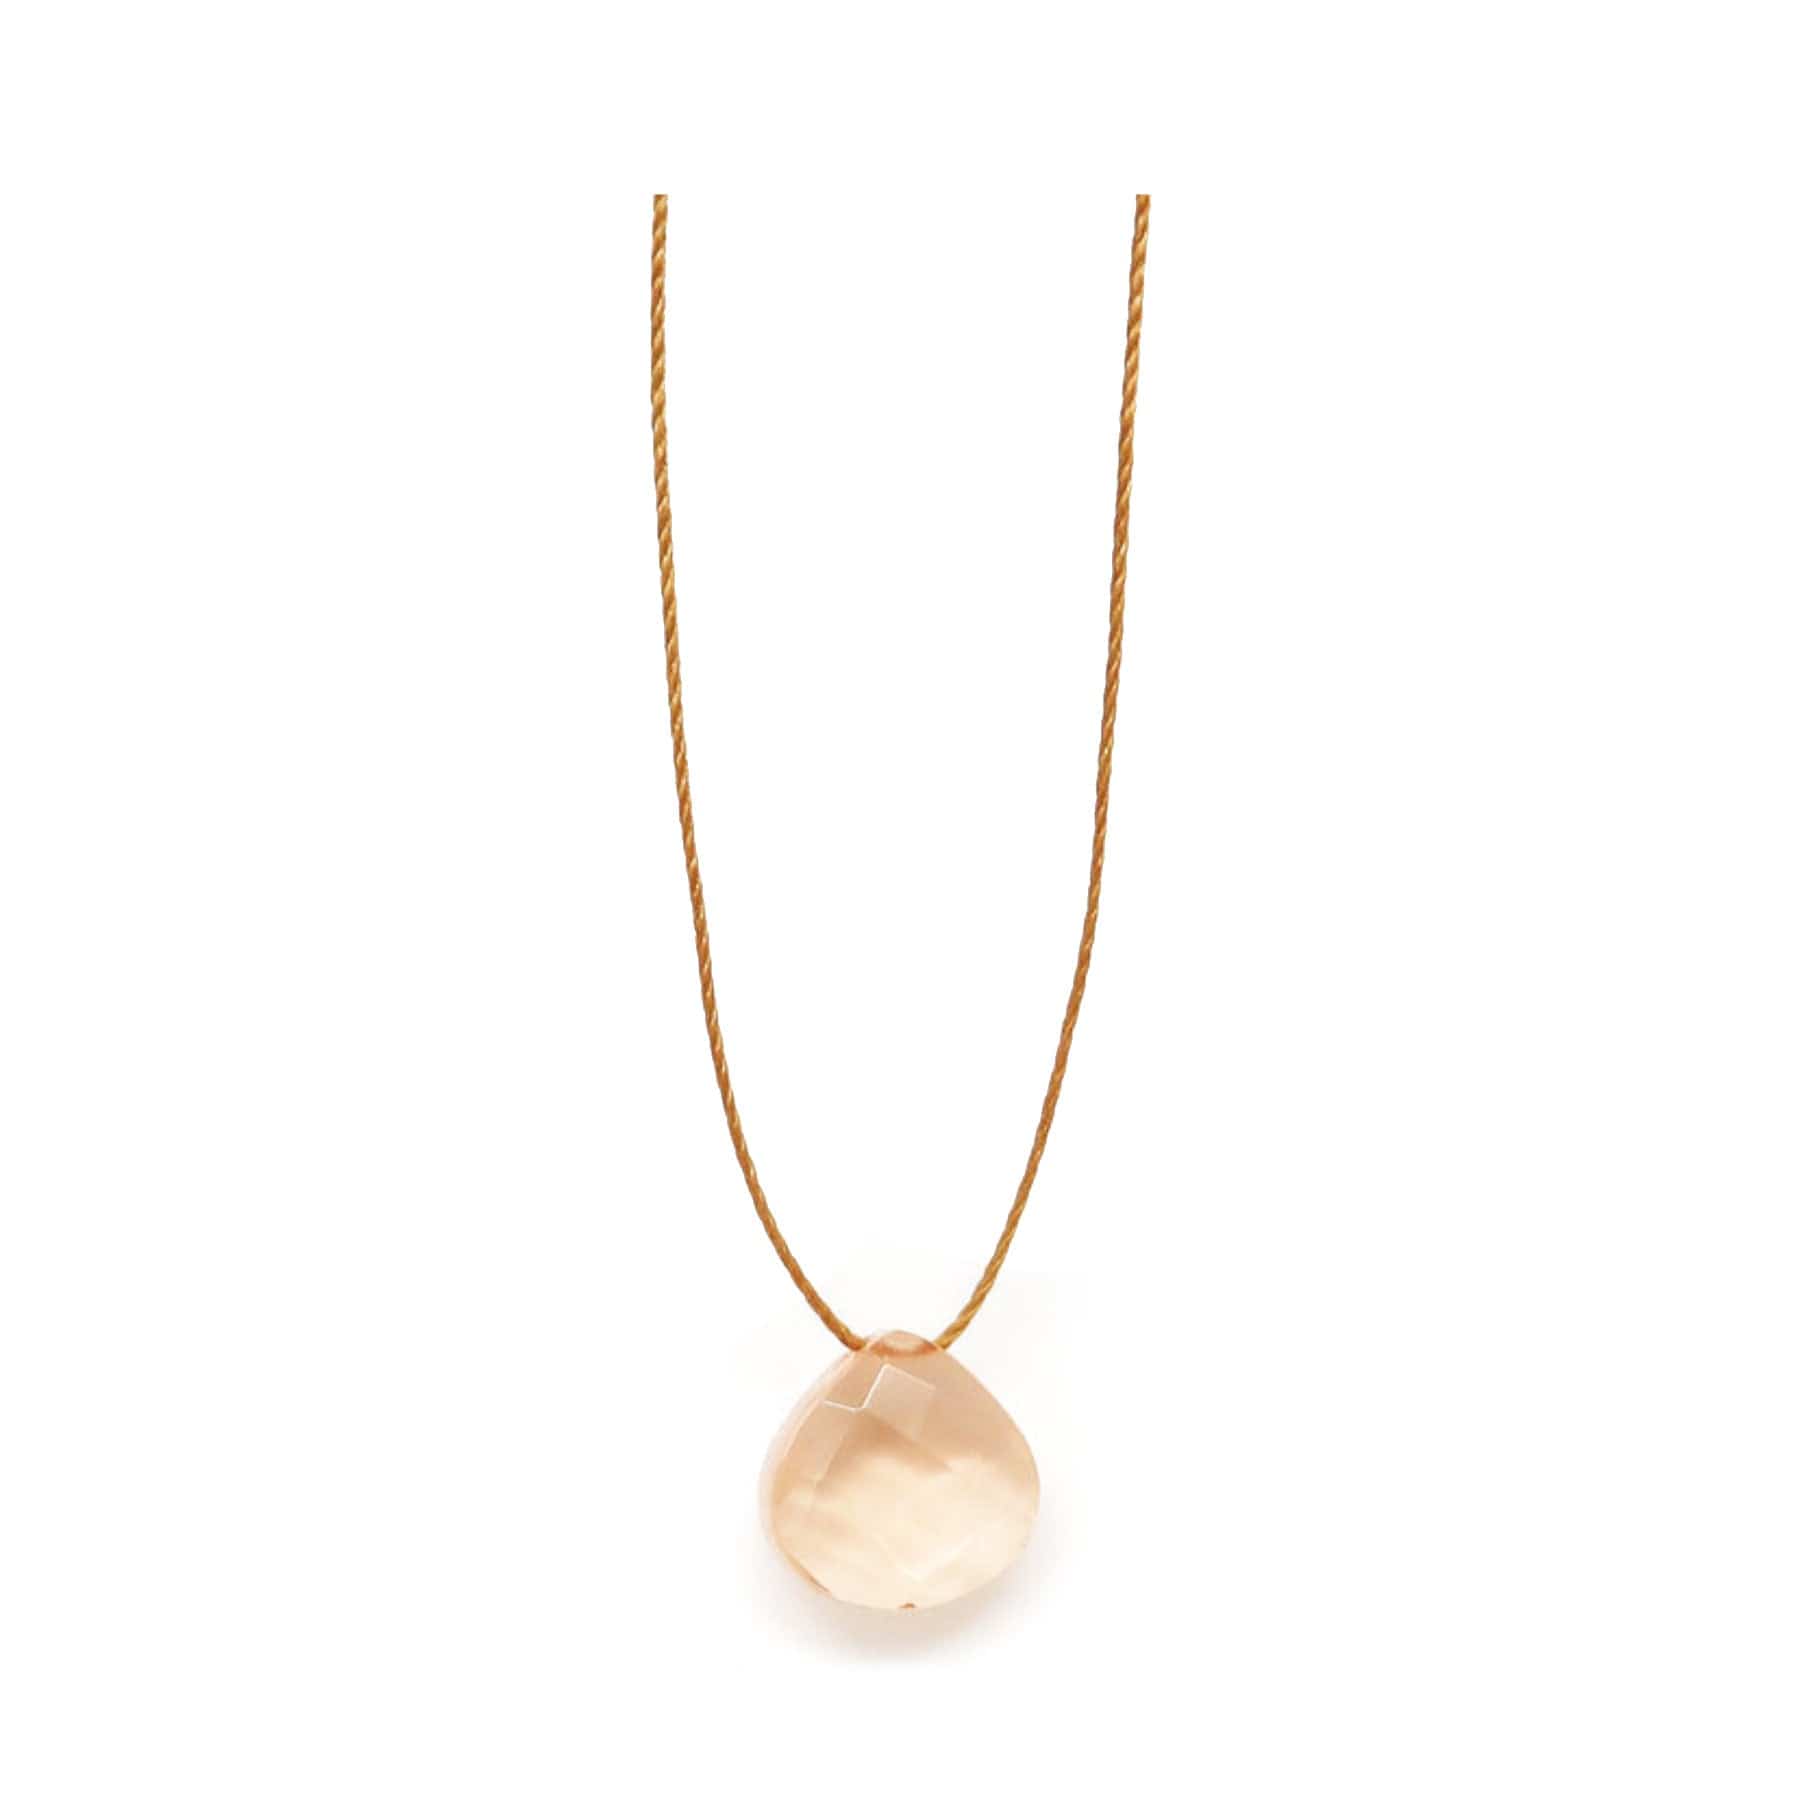 Elegant gold necklace with a single large round opal pendant on a white background.